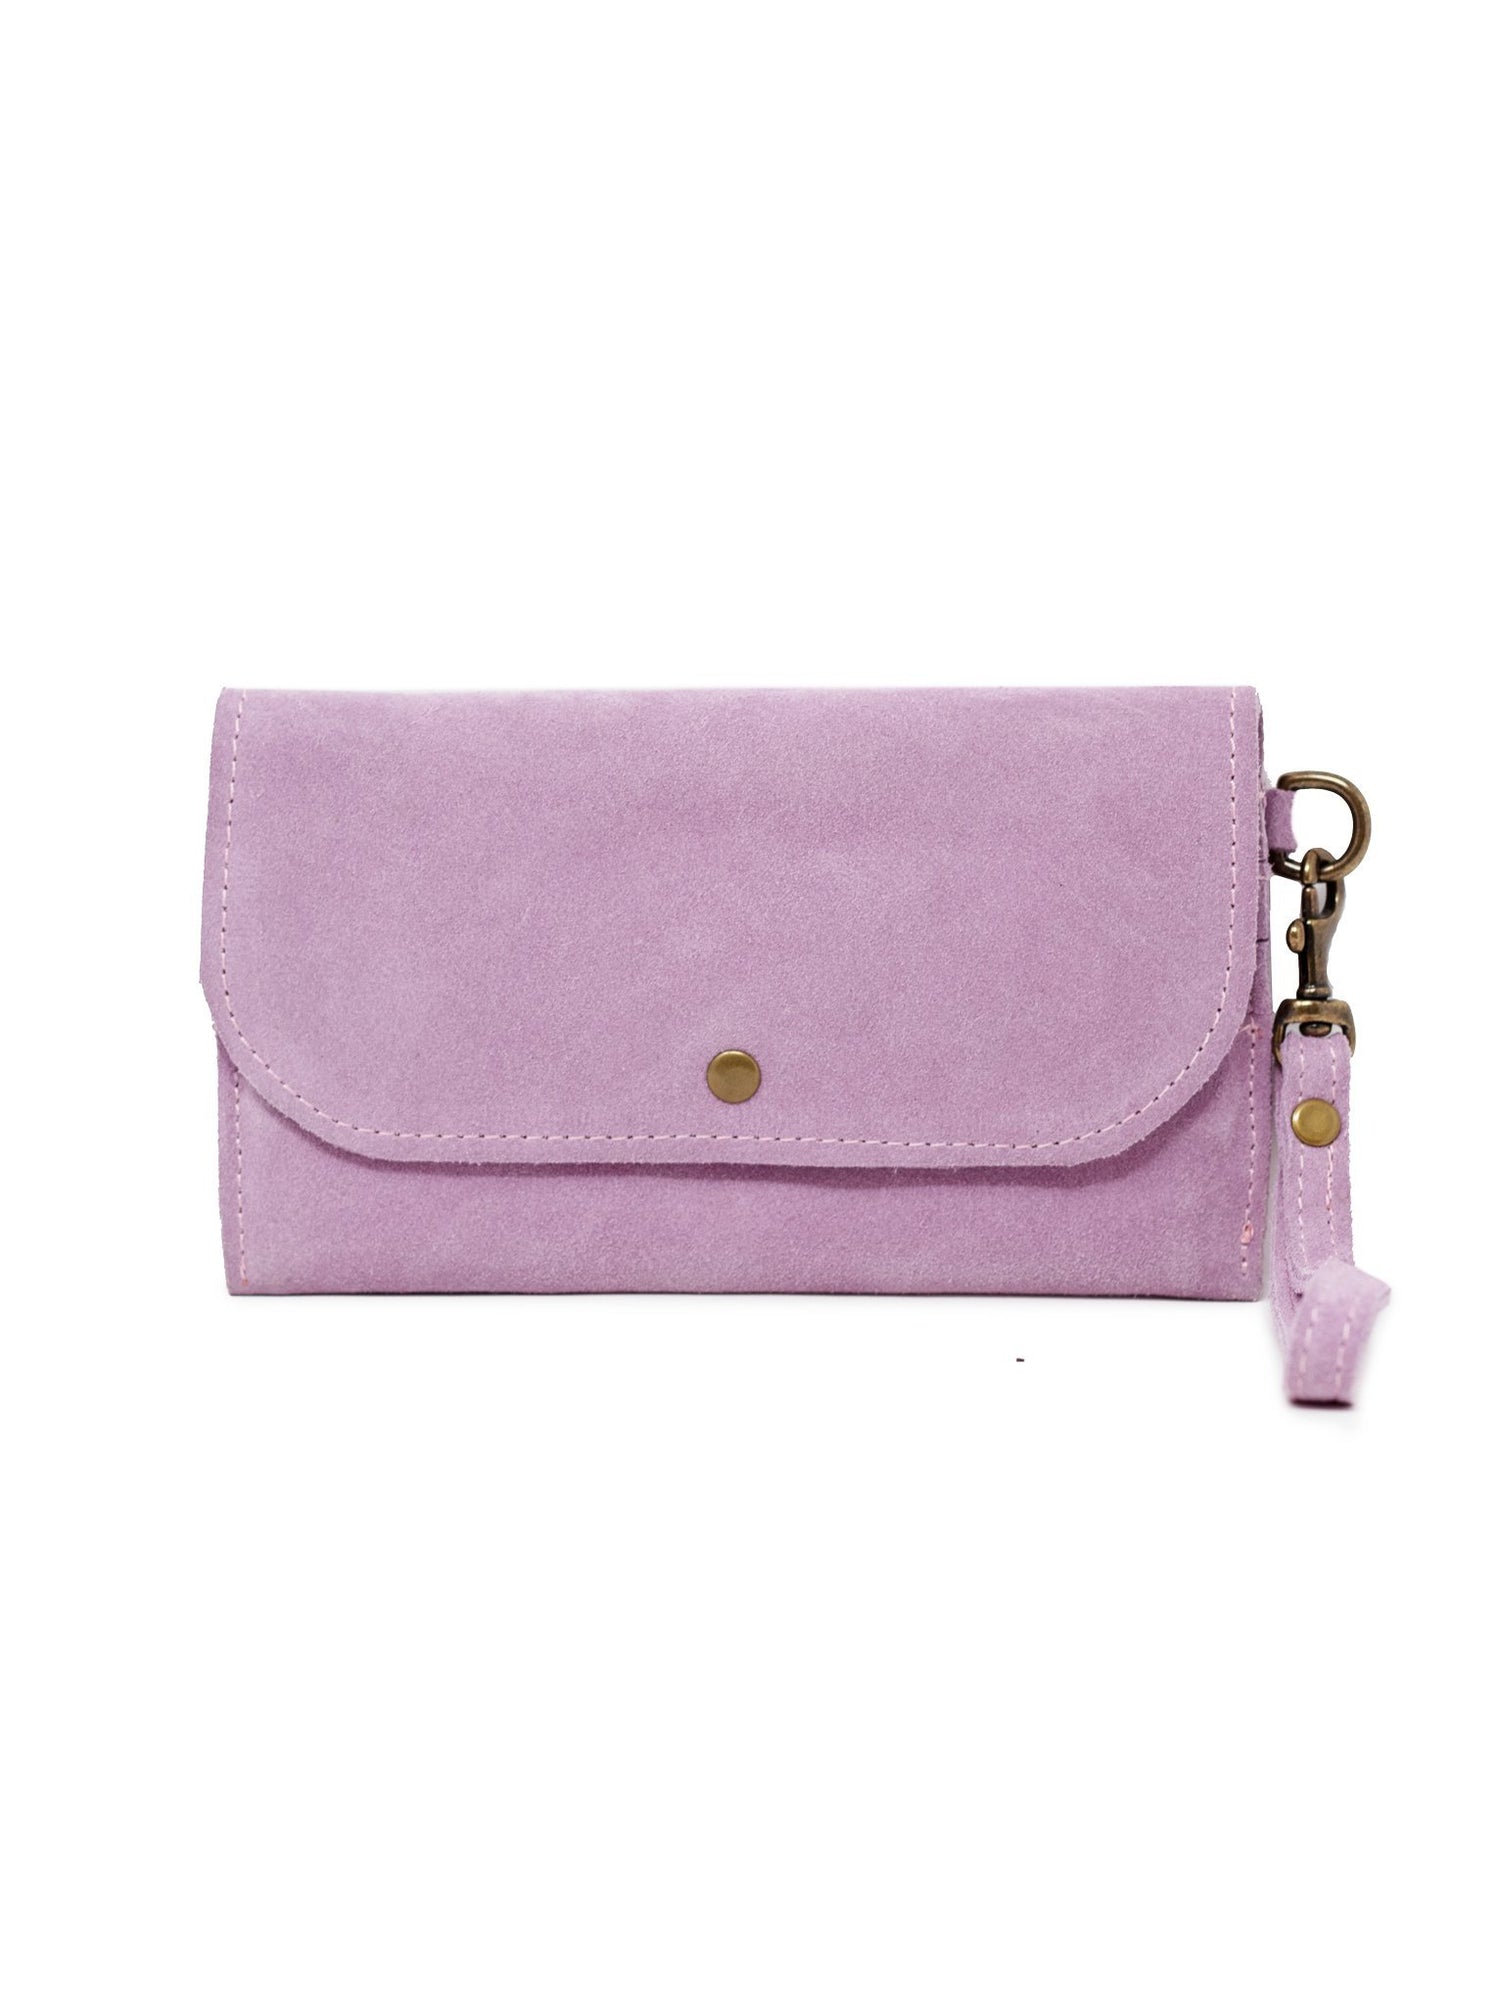 Able Mare Phone Wallet Wallets in Lilac at Wrapsody